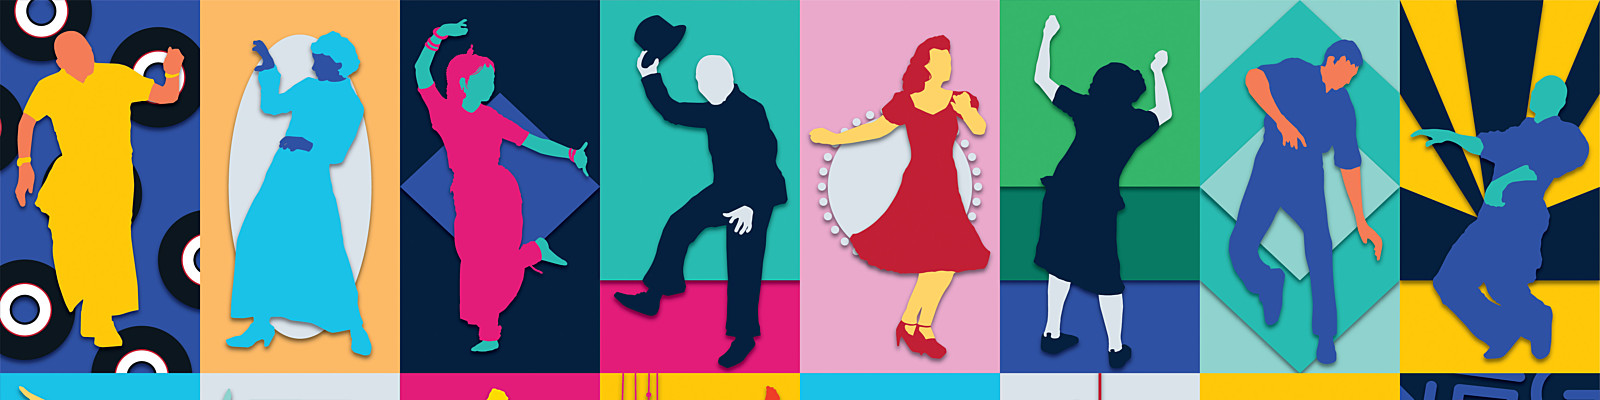 Colourful illustrations of dancing people, each doing a different move.